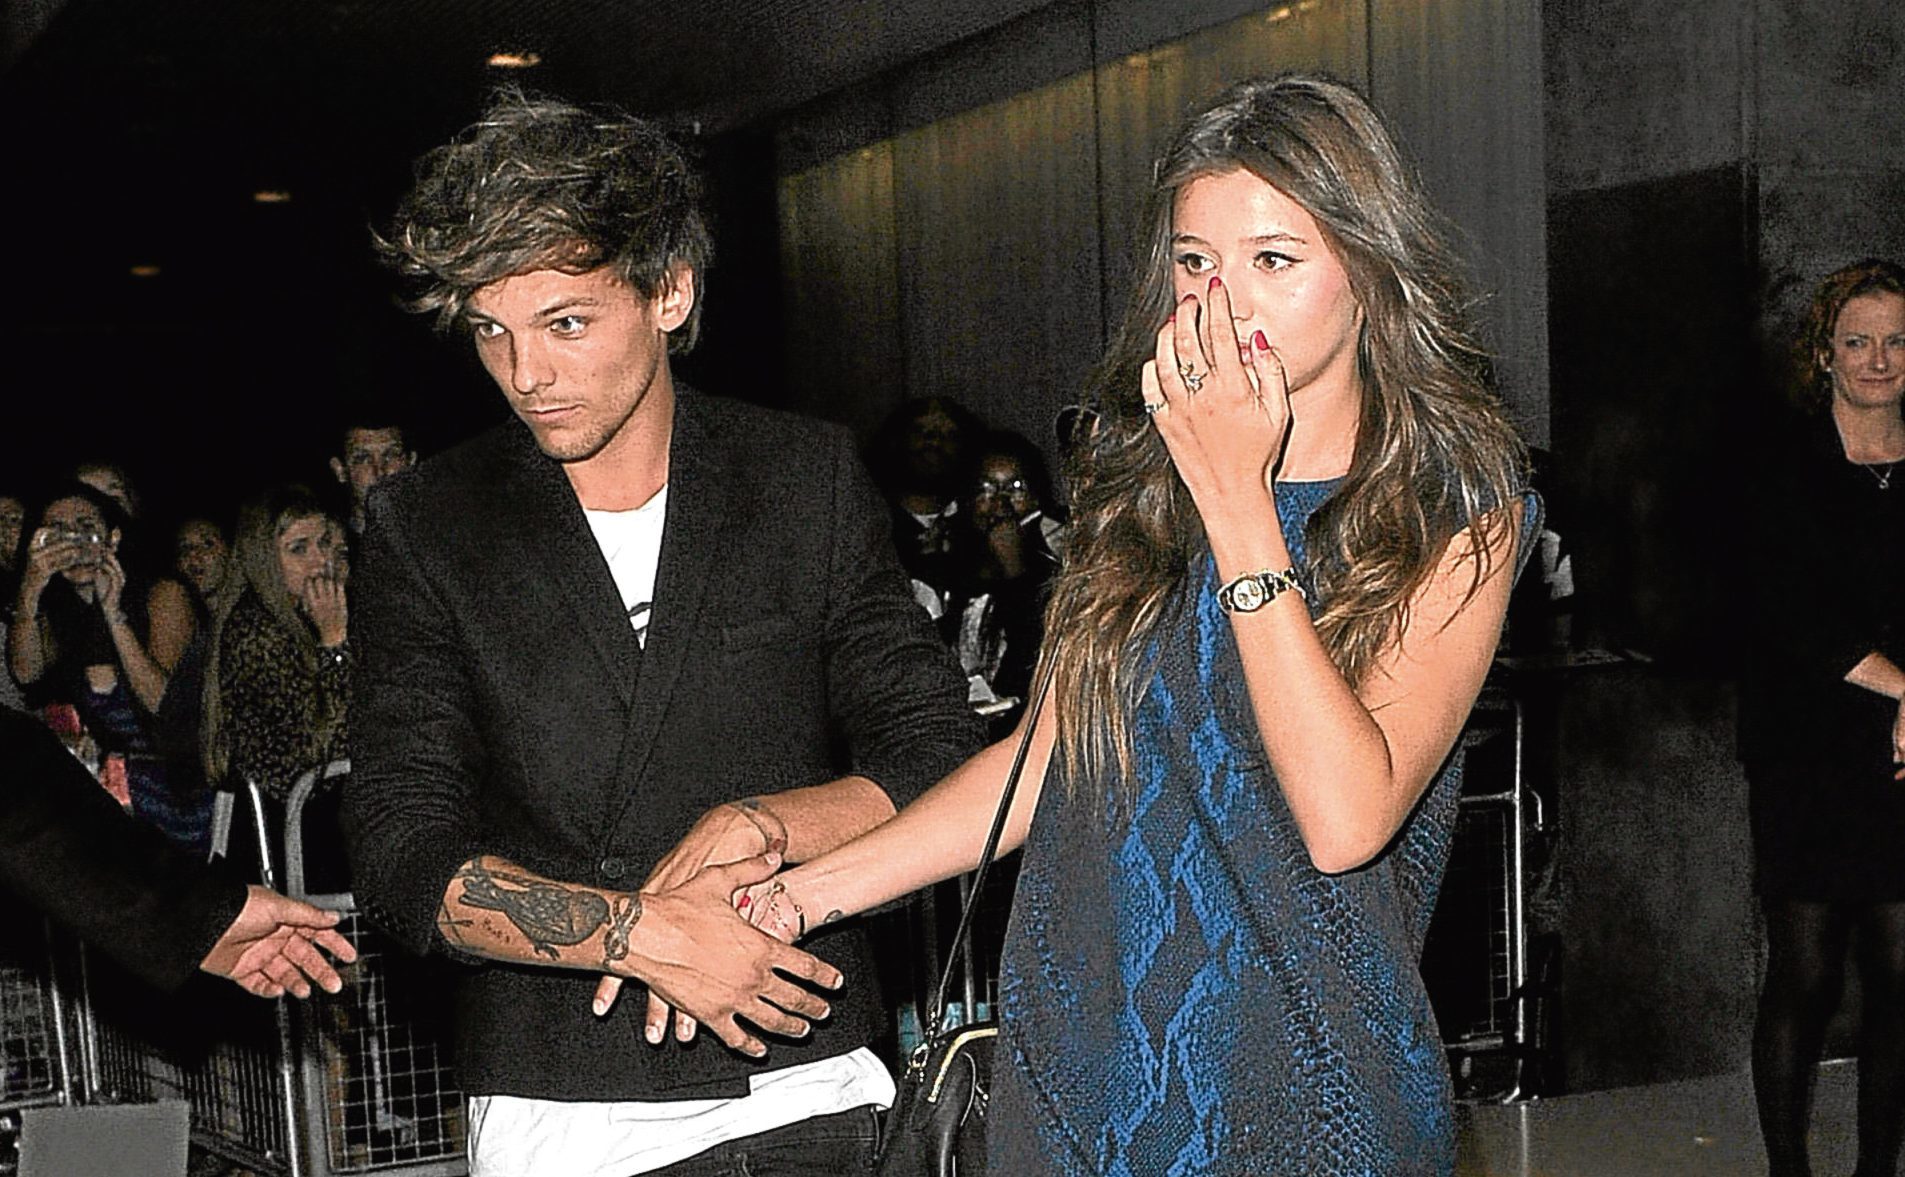 It’s been an eventful week for Louis Tomlinson and his girlfriend Eleanor Caldwell.